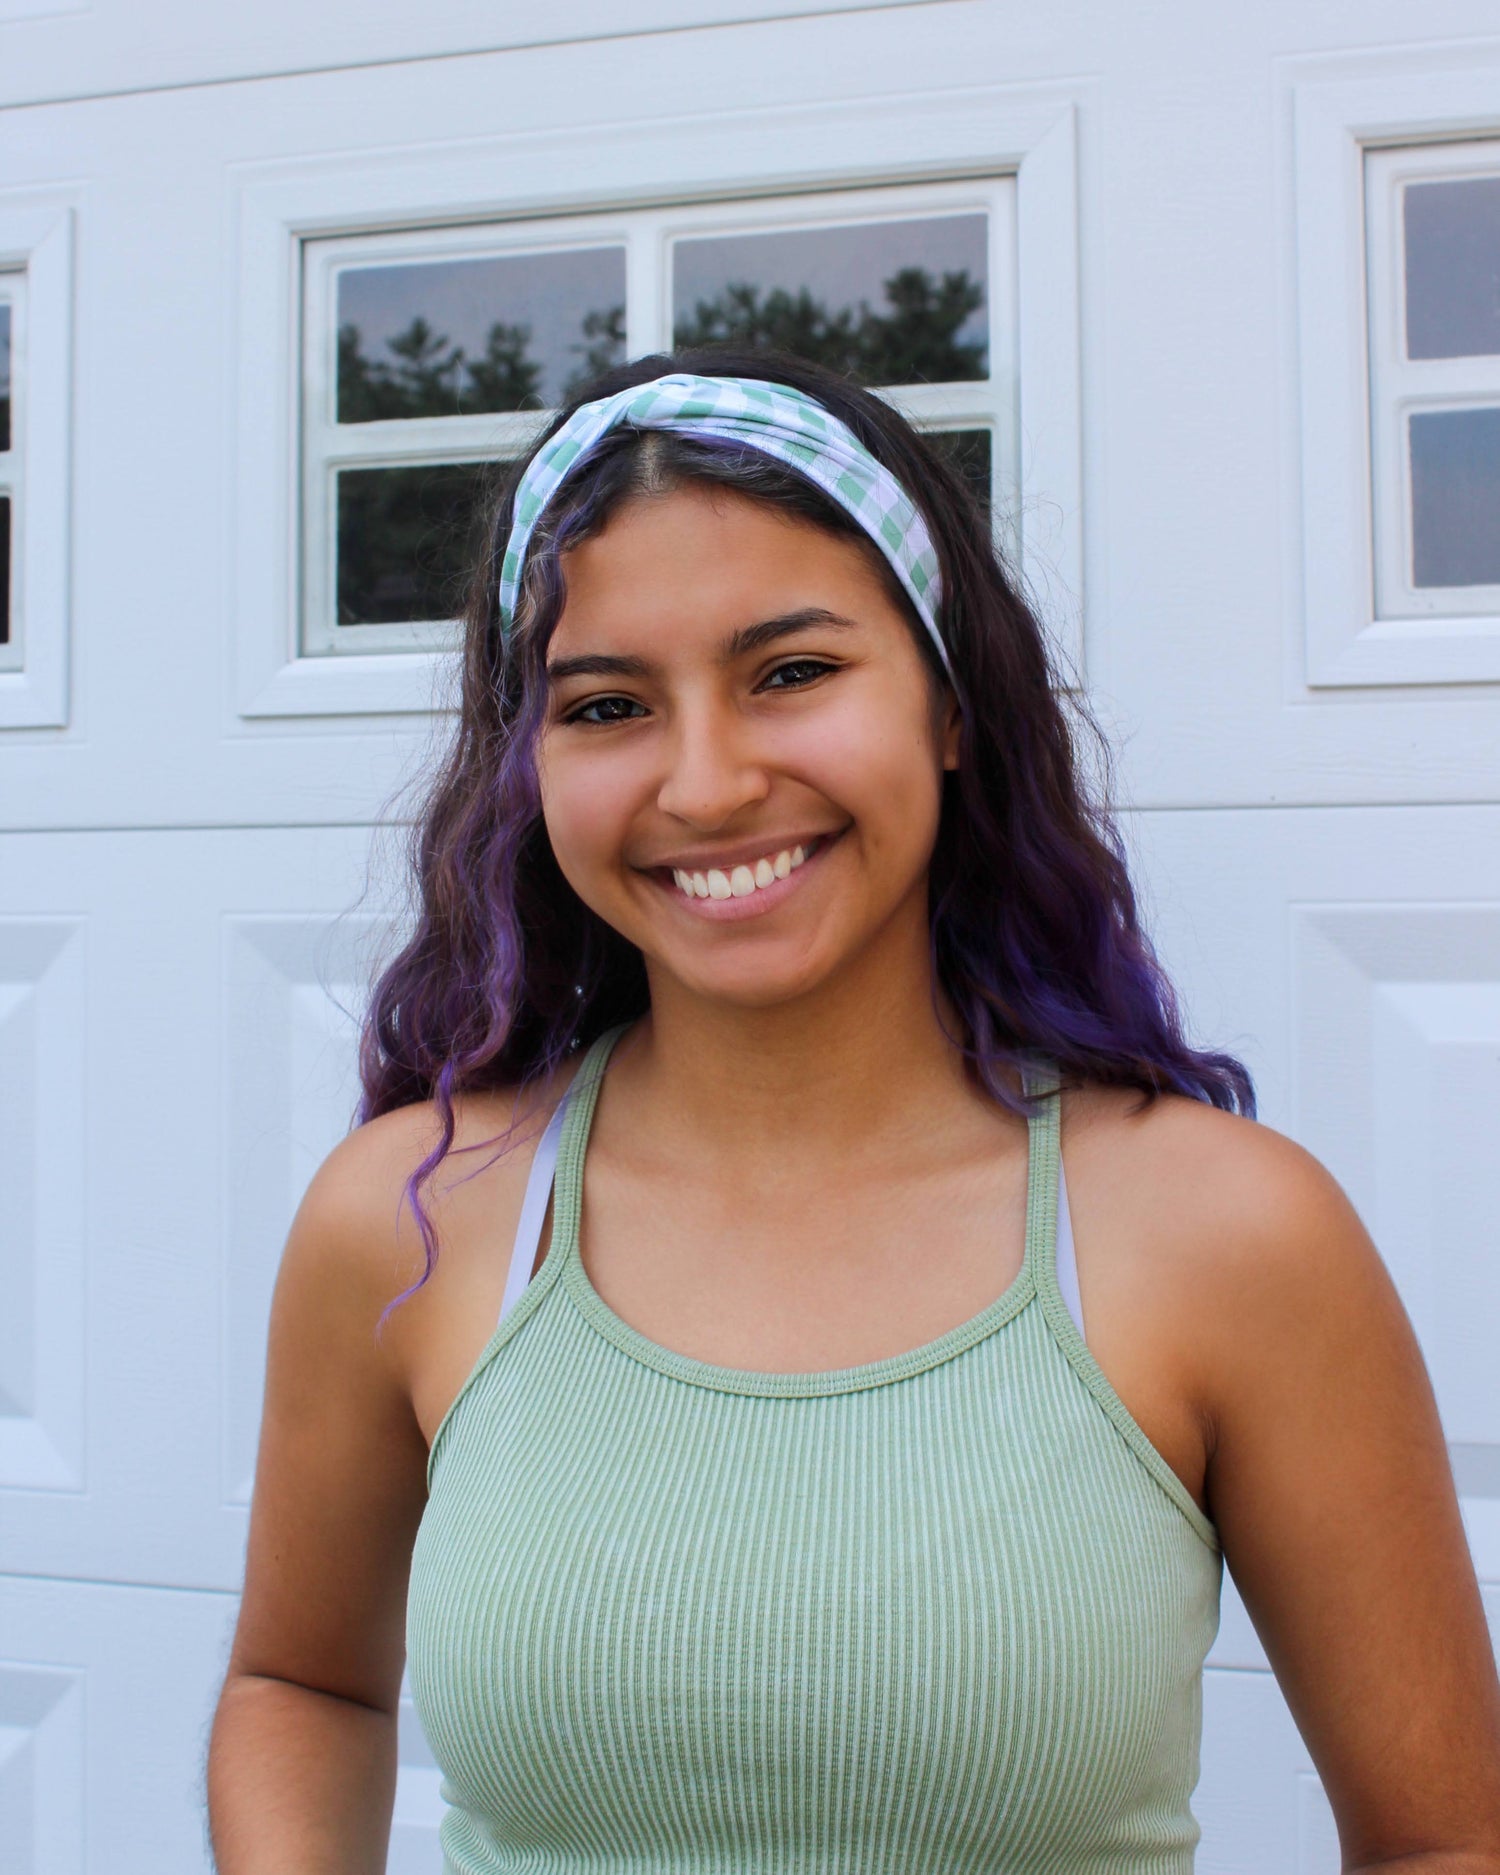 A girl with purple hair wearing a green gingham headband and green tank top